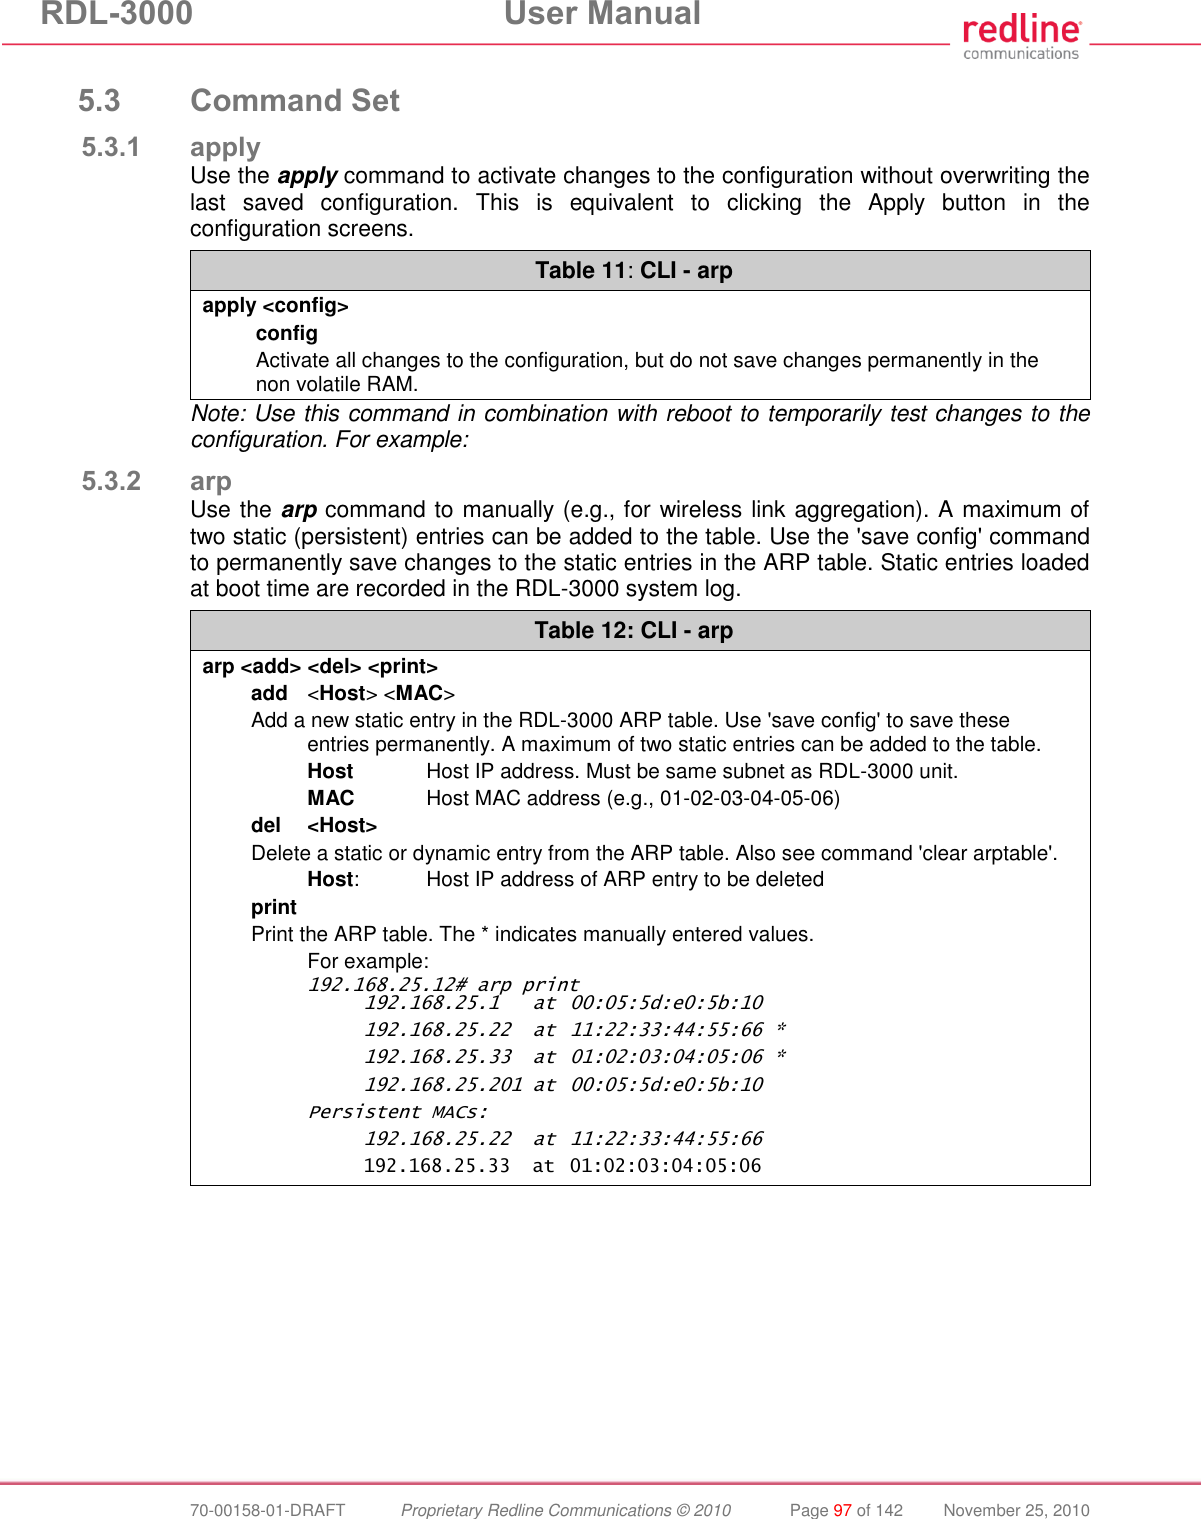 RDL-3000  User Manual  70-00158-01-DRAFT  Proprietary Redline Communications © 2010  Page 97 of 142  November 25, 2010  5.3 Command Set 5.3.1 apply Use the apply command to activate changes to the configuration without overwriting the last  saved  configuration.  This  is  equivalent  to  clicking  the  Apply  button  in  the configuration screens.  Table 11: CLI - arp apply &lt;config&gt; config Activate all changes to the configuration, but do not save changes permanently in the non volatile RAM. Note: Use this command in combination with reboot to temporarily test changes to the configuration. For example: 5.3.2 arp Use the arp command to manually (e.g., for wireless link aggregation). A maximum of two static (persistent) entries can be added to the table. Use the &apos;save config&apos; command to permanently save changes to the static entries in the ARP table. Static entries loaded at boot time are recorded in the RDL-3000 system log. Table 12: CLI - arp arp &lt;add&gt; &lt;del&gt; &lt;print&gt; add  &lt;Host&gt; &lt;MAC&gt; Add a new static entry in the RDL-3000 ARP table. Use &apos;save config&apos; to save these entries permanently. A maximum of two static entries can be added to the table.  Host  Host IP address. Must be same subnet as RDL-3000 unit.  MAC  Host MAC address (e.g., 01-02-03-04-05-06) del  &lt;Host&gt; Delete a static or dynamic entry from the ARP table. Also see command &apos;clear arptable&apos;.  Host:  Host IP address of ARP entry to be deleted print Print the ARP table. The * indicates manually entered values.   For example: 192.168.25.12# arp print   192.168.25.1  at  00:05:5d:e0:5b:10   192.168.25.22  at  11:22:33:44:55:66 *   192.168.25.33  at  01:02:03:04:05:06 *   192.168.25.201 at  00:05:5d:e0:5b:10 Persistent MACs:   192.168.25.22  at  11:22:33:44:55:66   192.168.25.33  at  01:02:03:04:05:06  